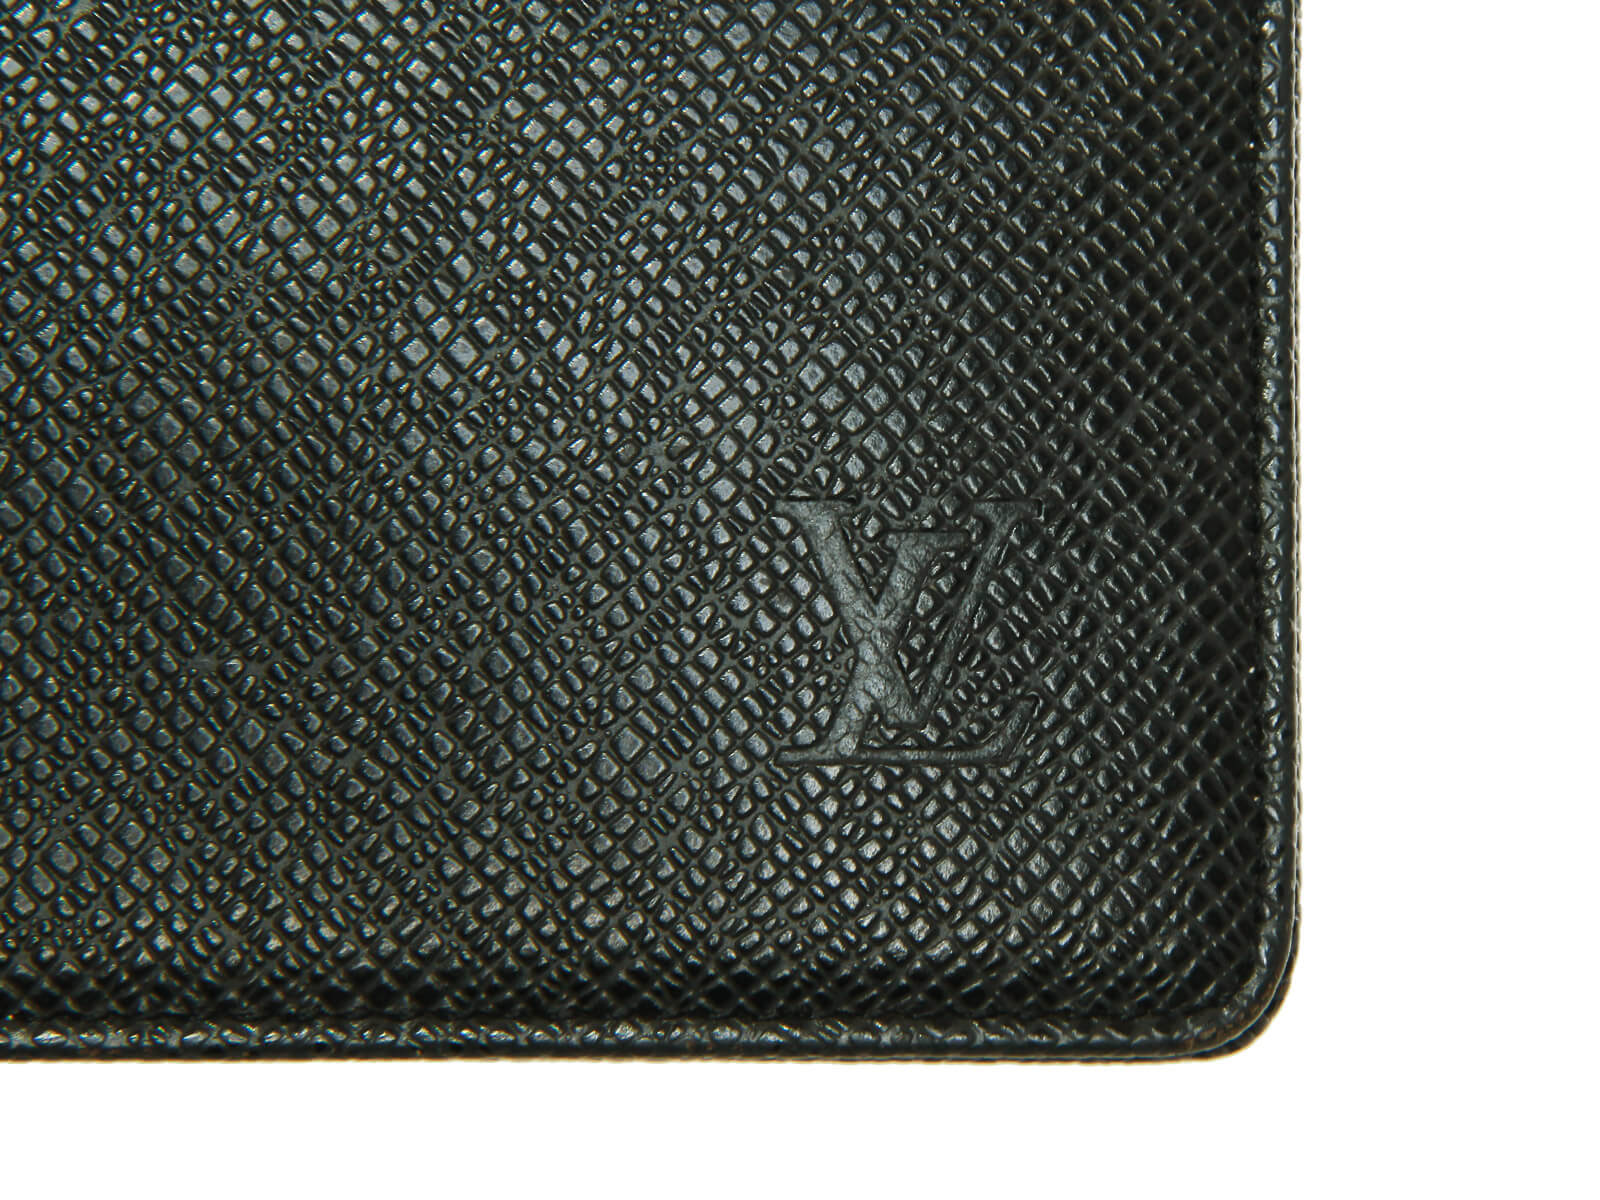 Louis Vuitton Agenda mm Black Leather Wallet (Pre-Owned)